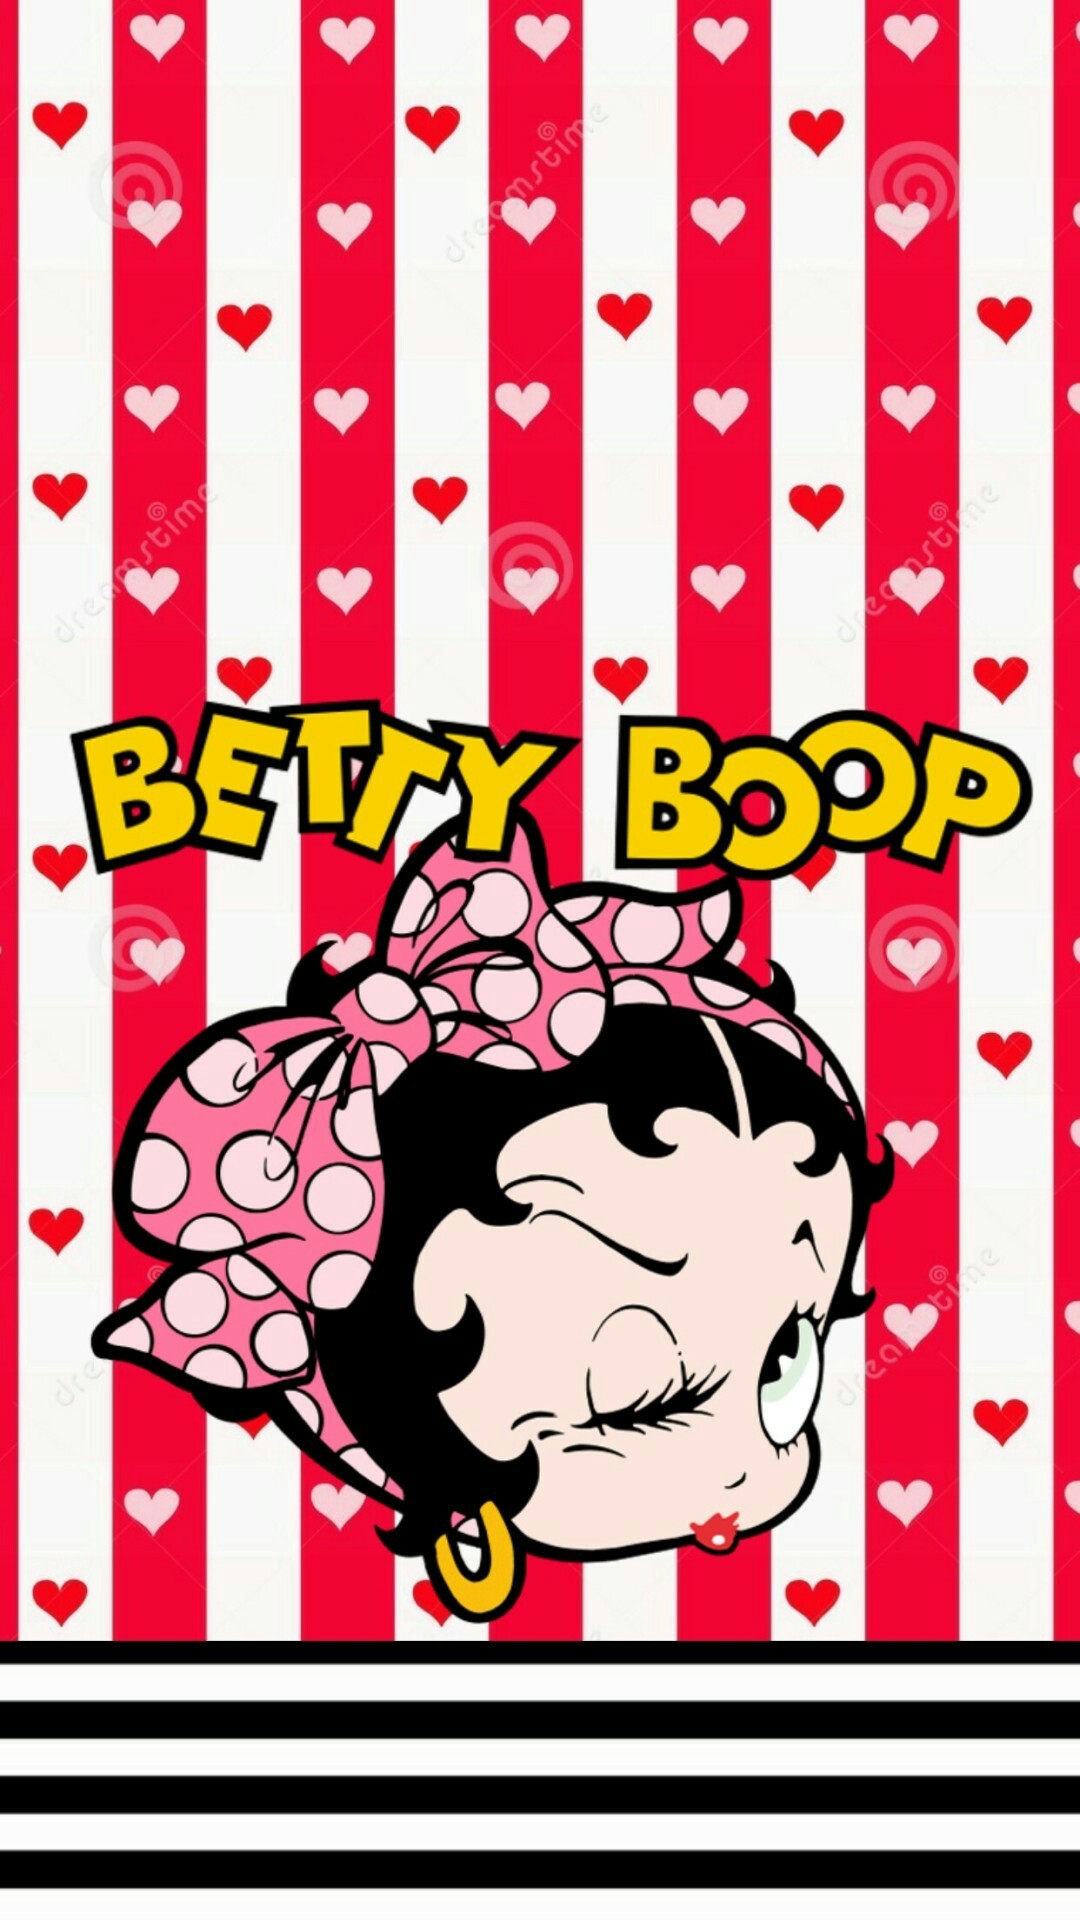 Free Download Wallpaper Betty Boop 49 Images 1080x19 For Your Desktop Mobile Tablet Explore 16 Jim Beam Iphone Wallpaper Jim Beam Iphone Wallpaper Jim Beam Wallpaper Hd Jim Morrison Iphone Wallpaper